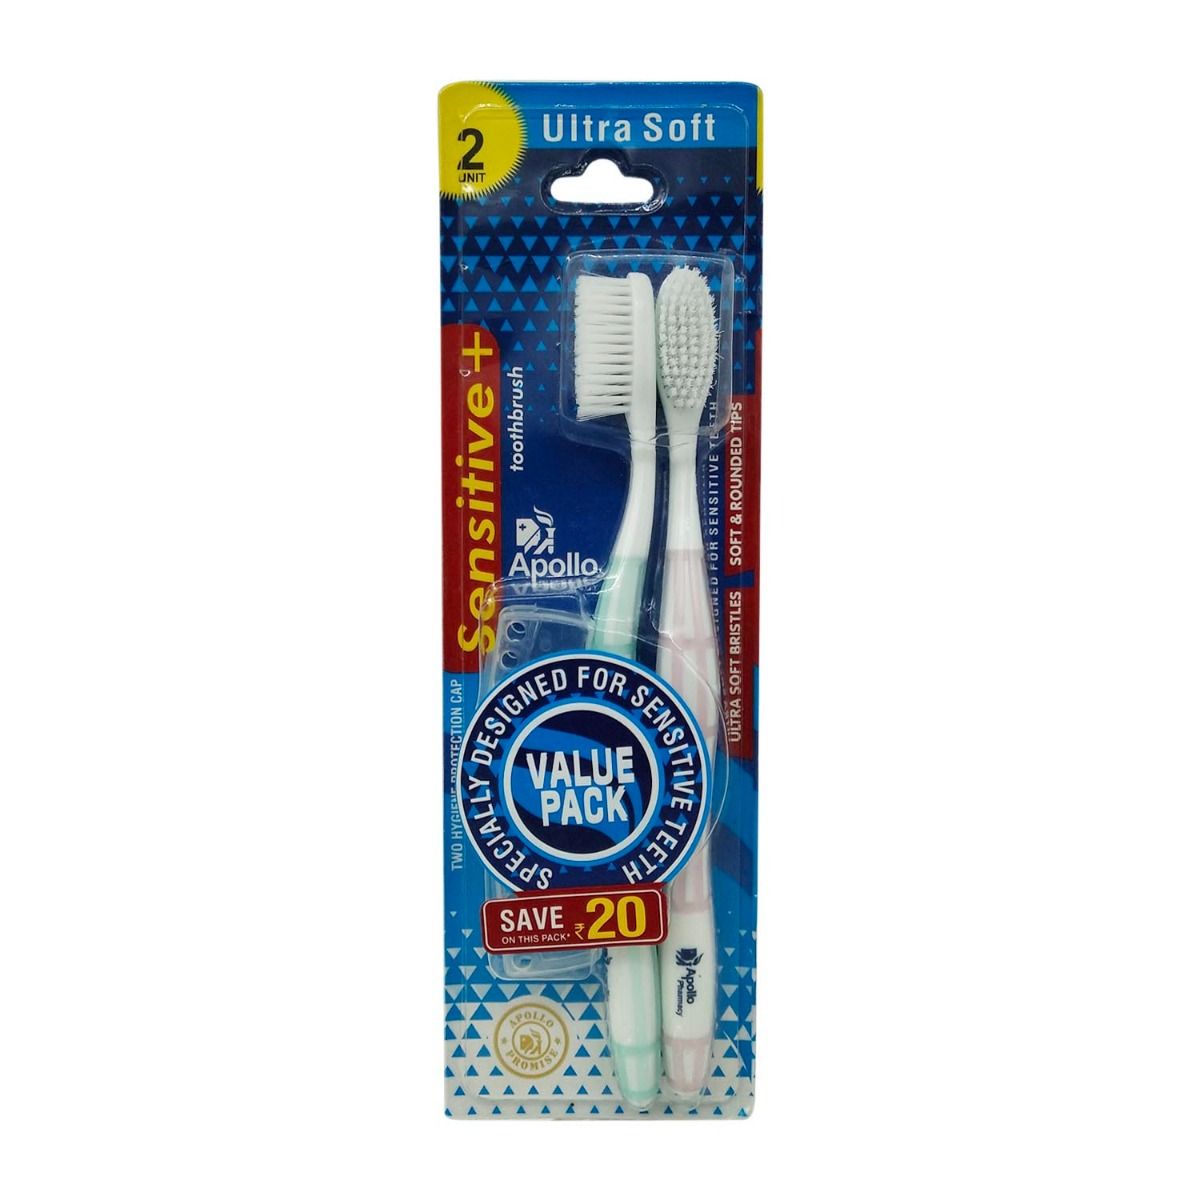 Apollo Pharmacy Value Pack Sensitive Plus Toothbrush, 2 Count, Pack of 1 